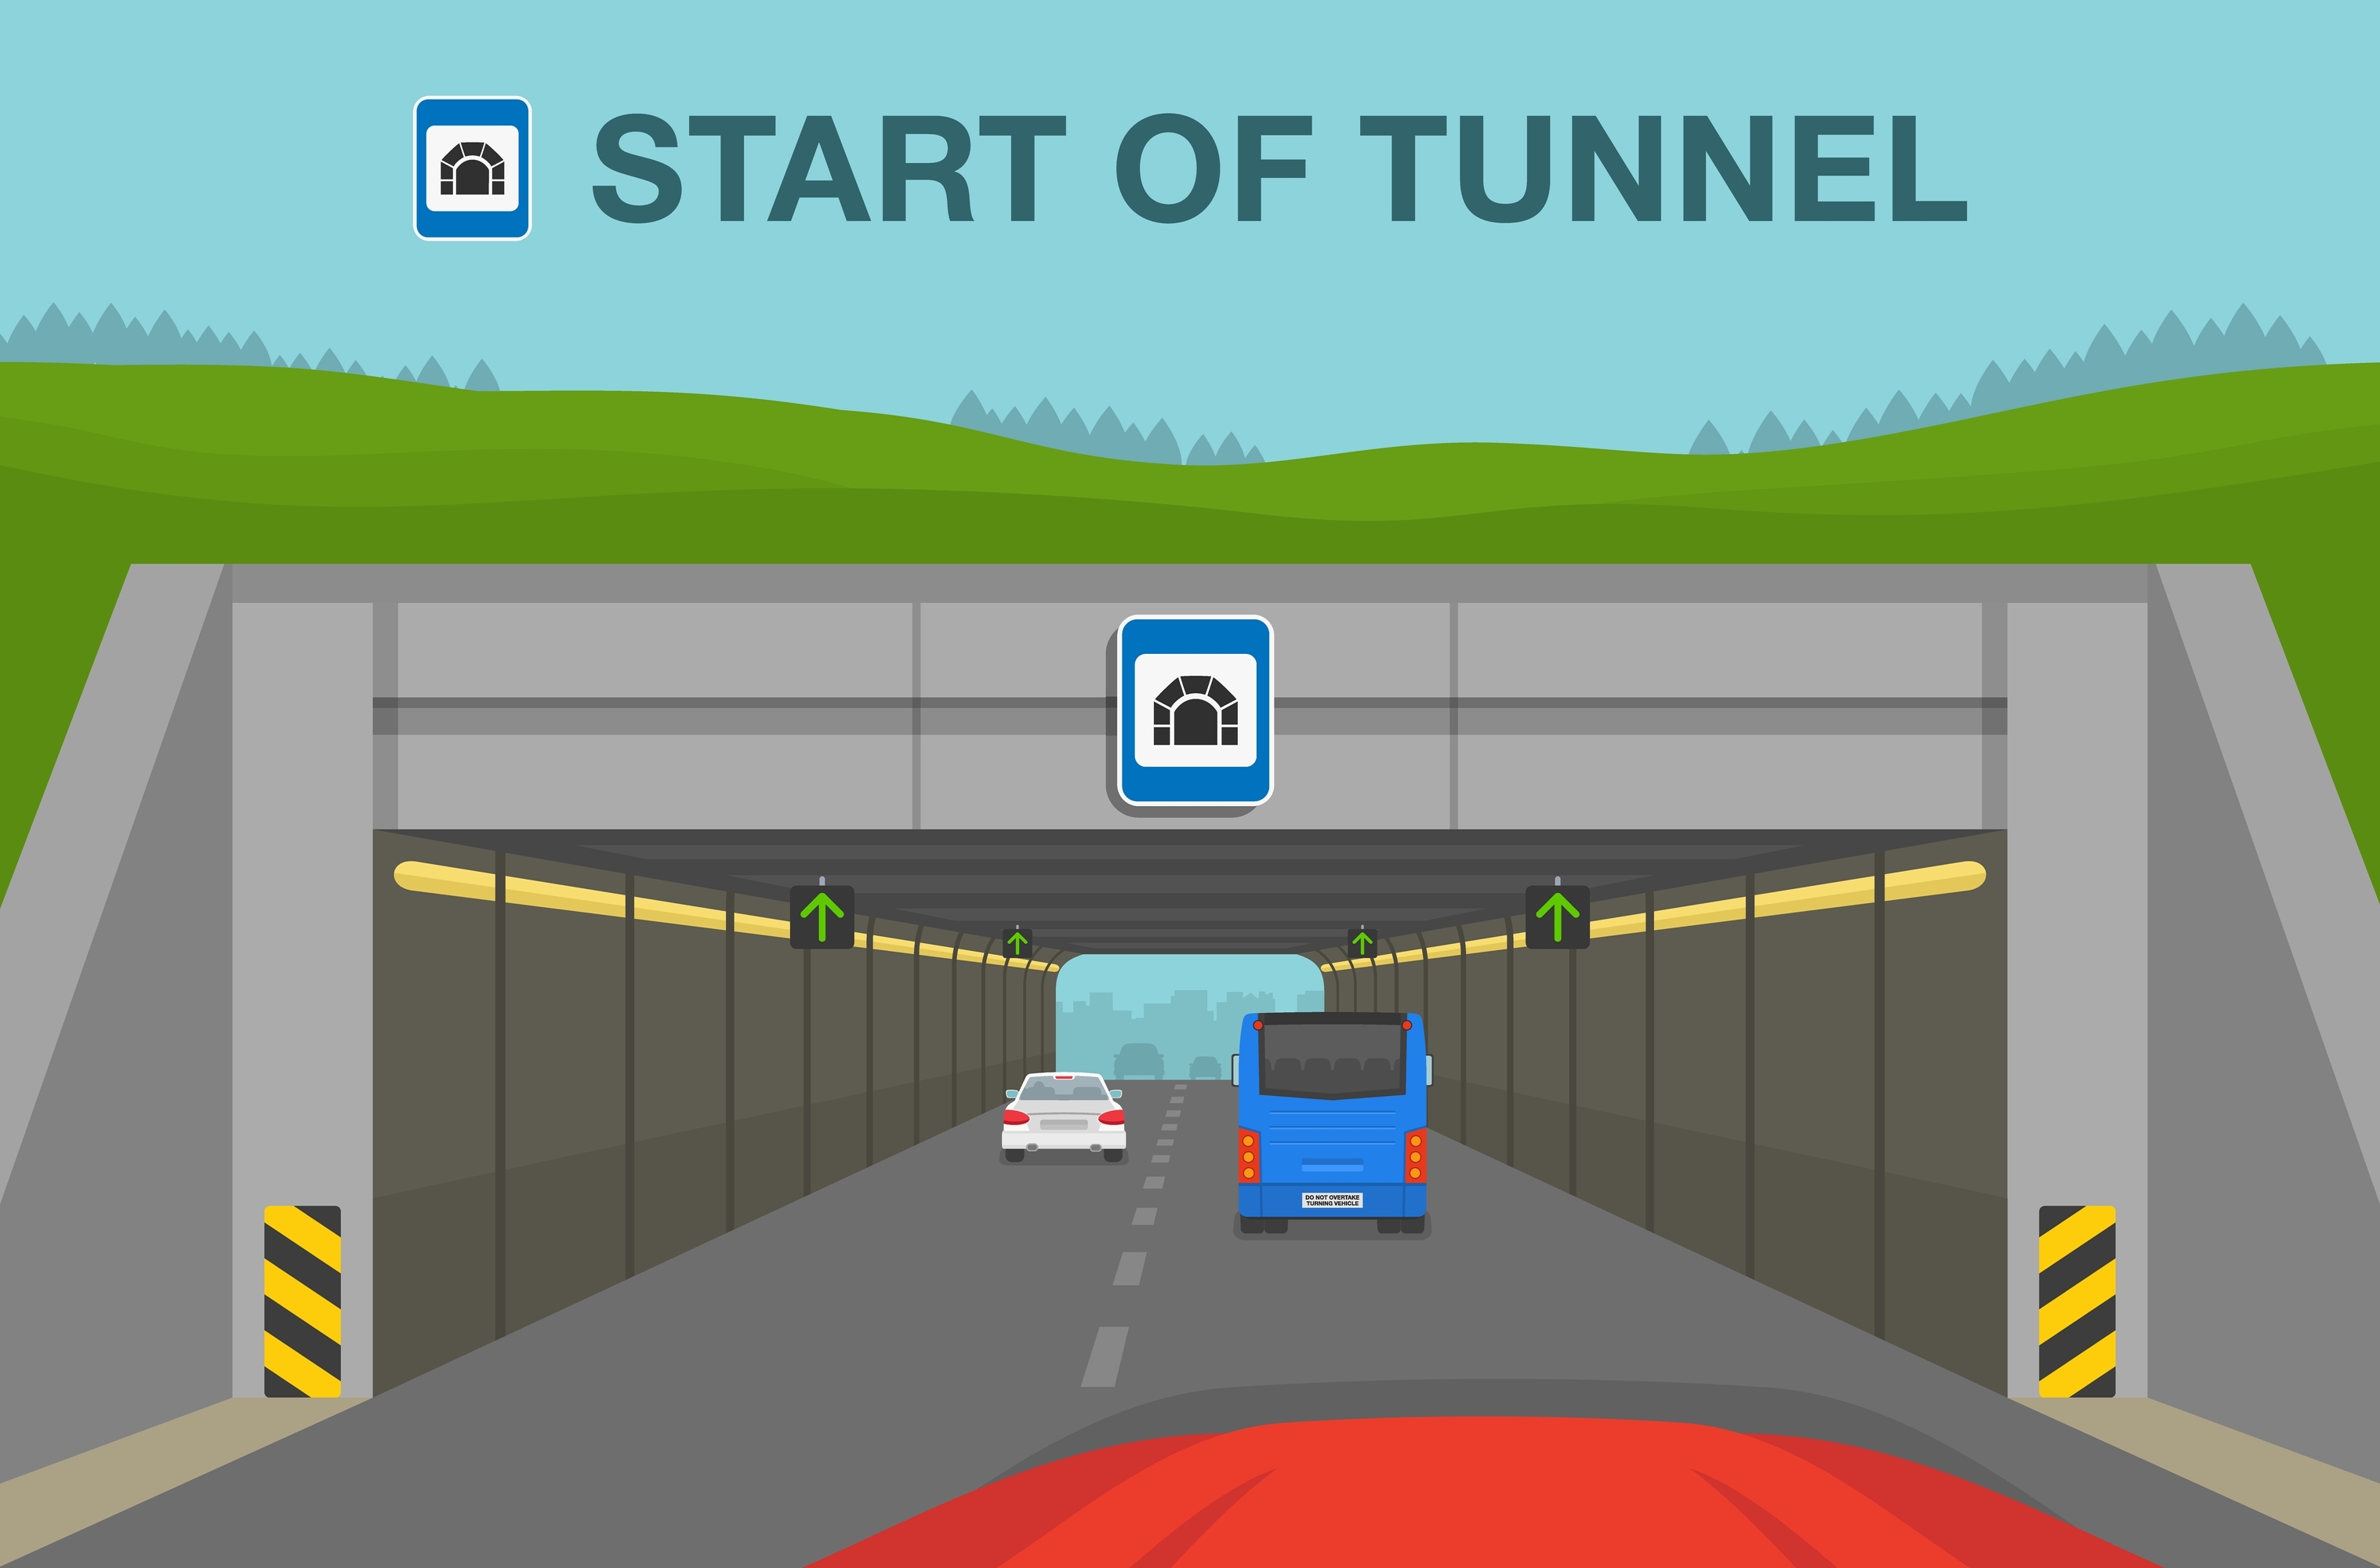 Tunnel Vehicle Monitoring and Classification via LiDAR and Video Camera